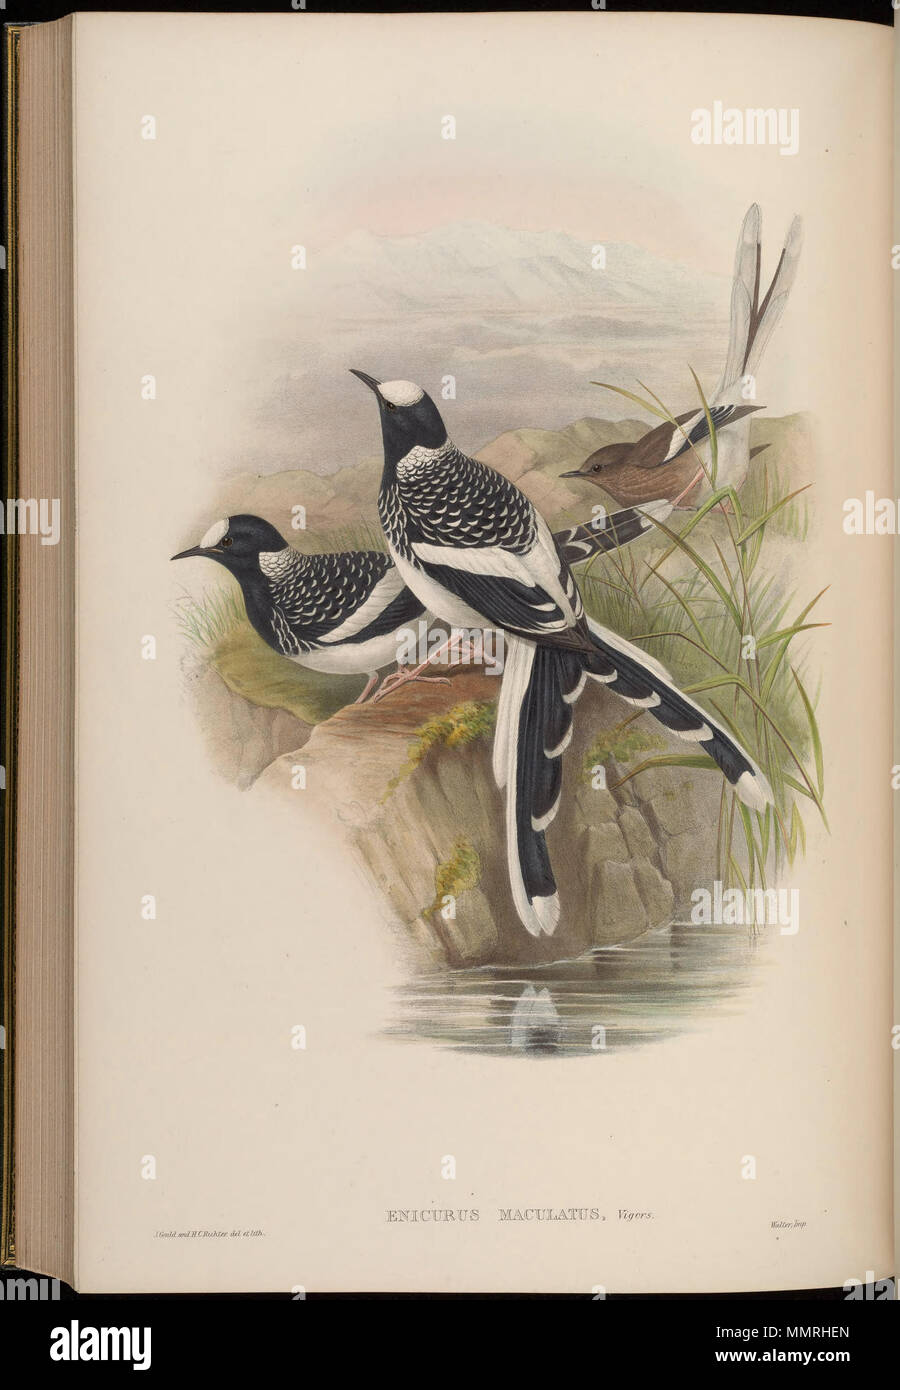 . Enicurus maculatus  . between 1850 and 1883.   John Gould  (1804–1881)      Alternative names Gould  Description British zoologist  Date of birth/death 14 September 1804 2 March 1881  Location of birth/death Lyme Regis London  Authority control  : Q313787 VIAF:?29597222 ISNI:?0000 0001 2125 9888 ULAN:?500006638 LCCN:?n79100355 NLA:?35137514 WorldCat    &  Henry Constantine Richter  (1821–1902)    Description British animal painter  Date of birth/death 1821 16 March 1902  Location of birth Royal Borough of Kensington and Chelsea  Authority control  : Q1567083 VIAF:?227079511 ISNI:?0000 0003 6 Stock Photo